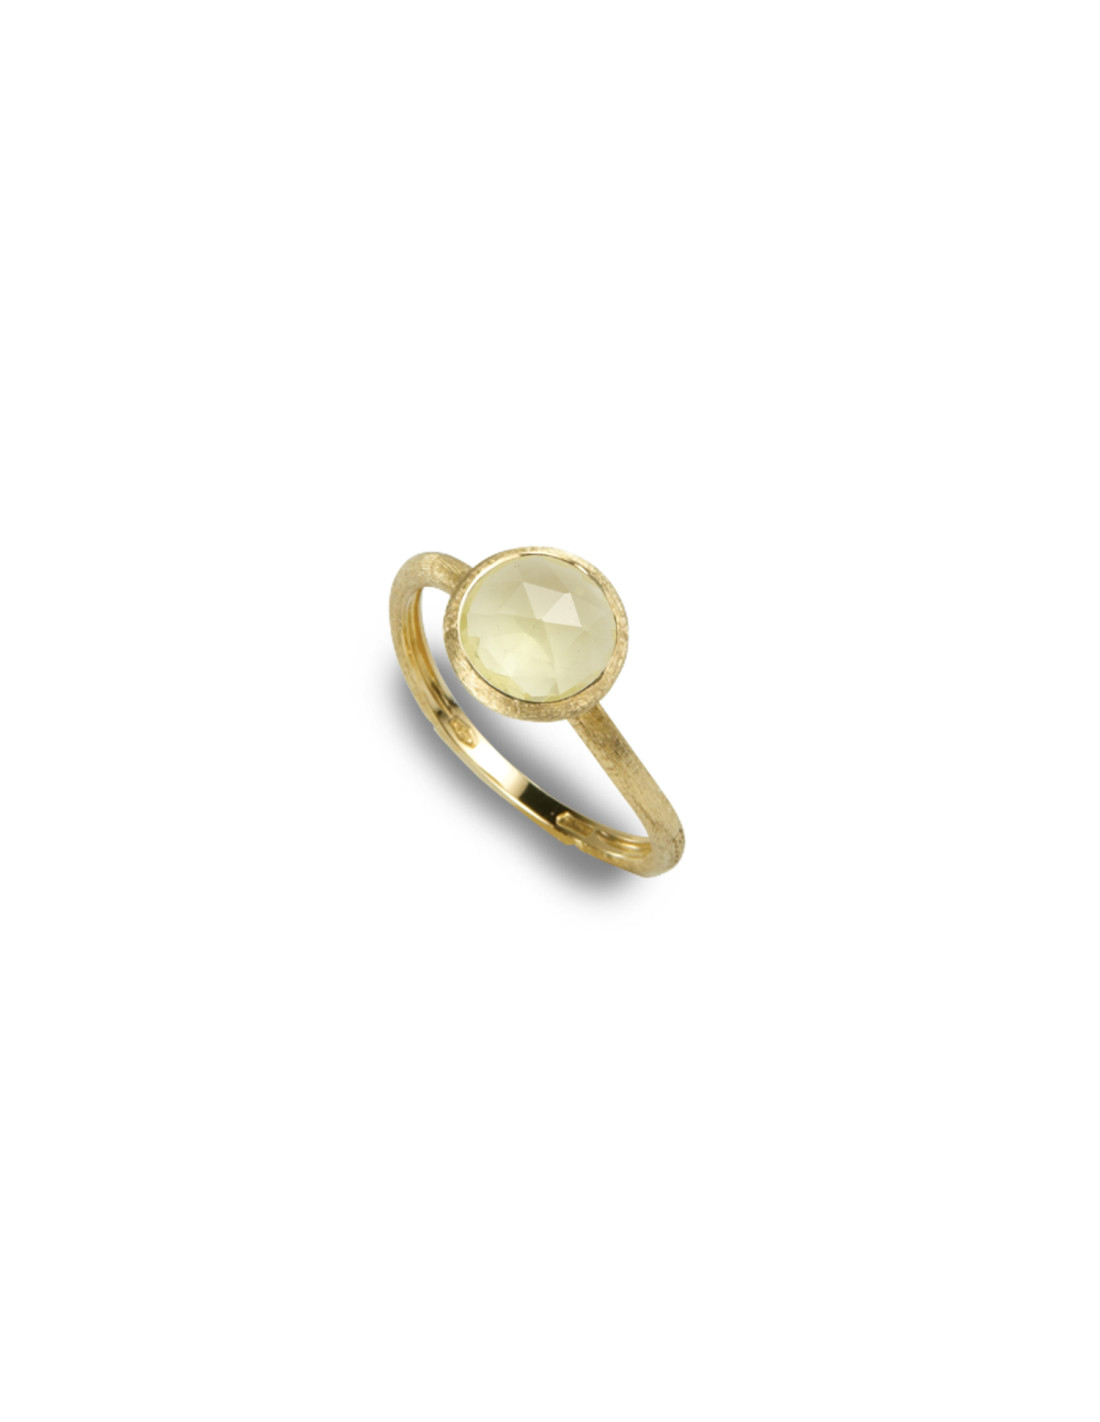 Marco Bicego Jaipur Ring yellow gold ref: AB471-LC01- AB471-LC01